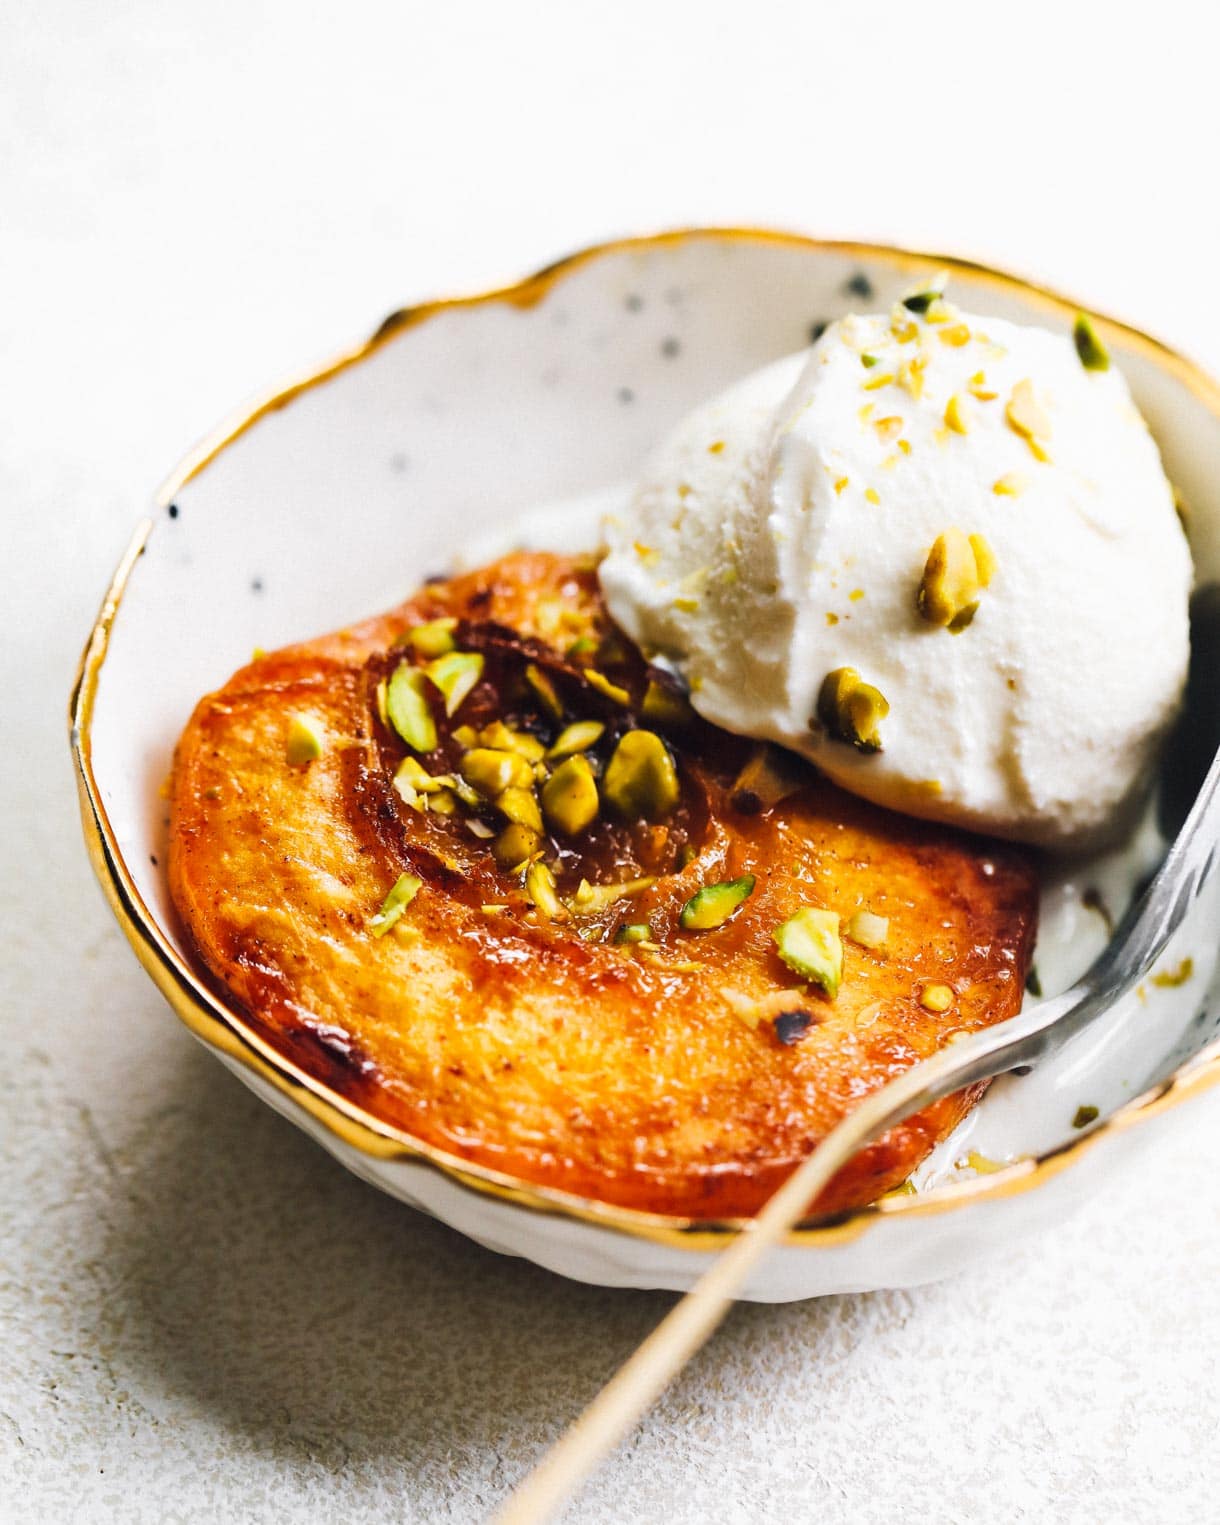 baked peaches with ice cream and crushed pistachios